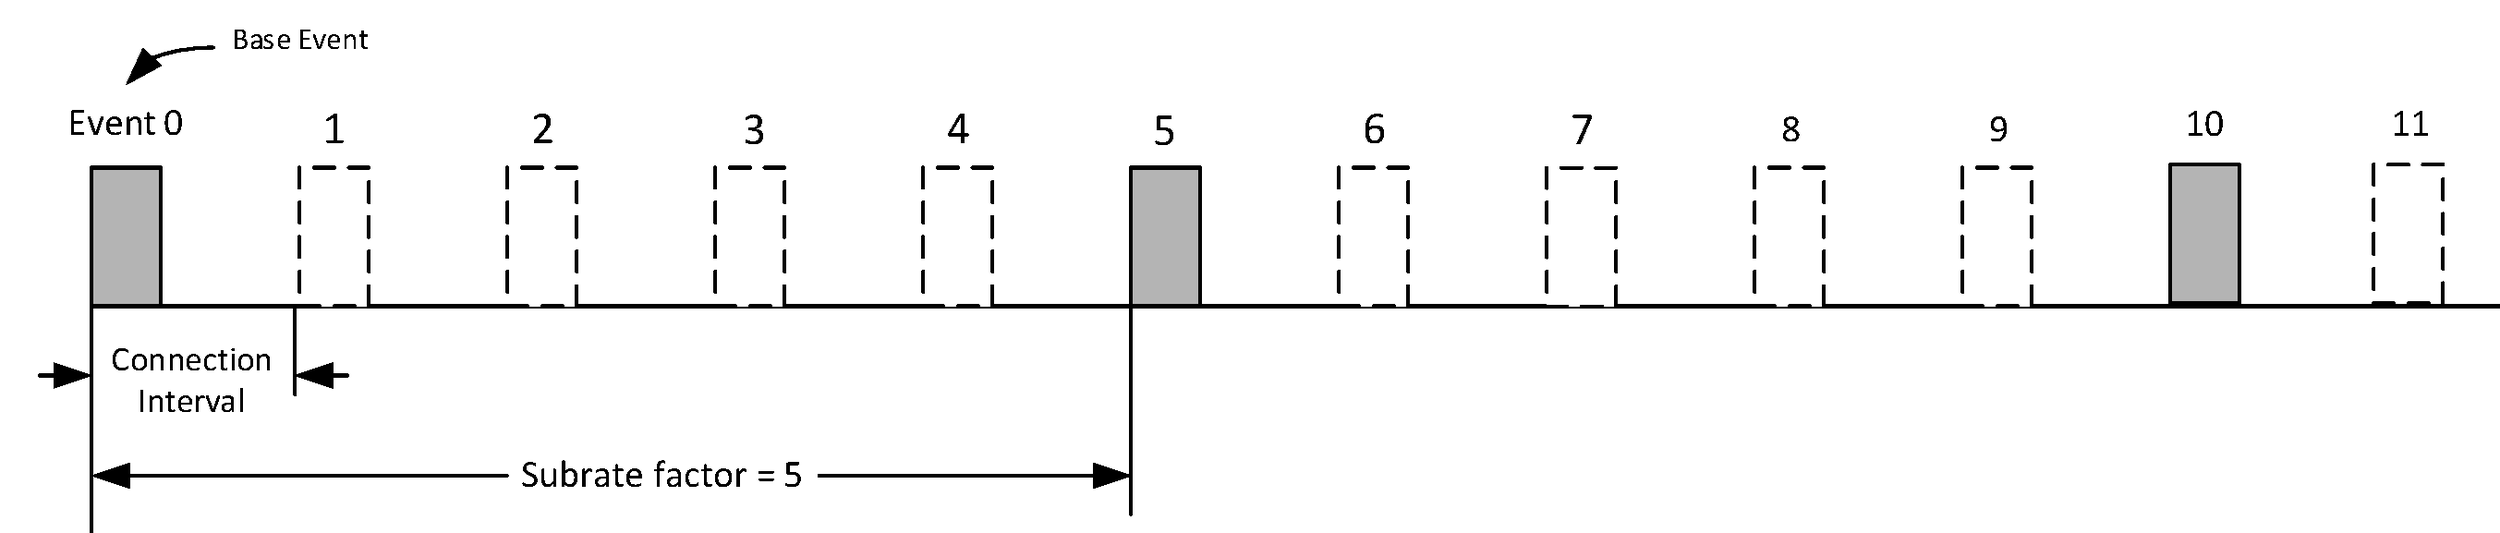 Connection events used when connSubrateFactor = 5 and connSubrateBaseEvent = 0